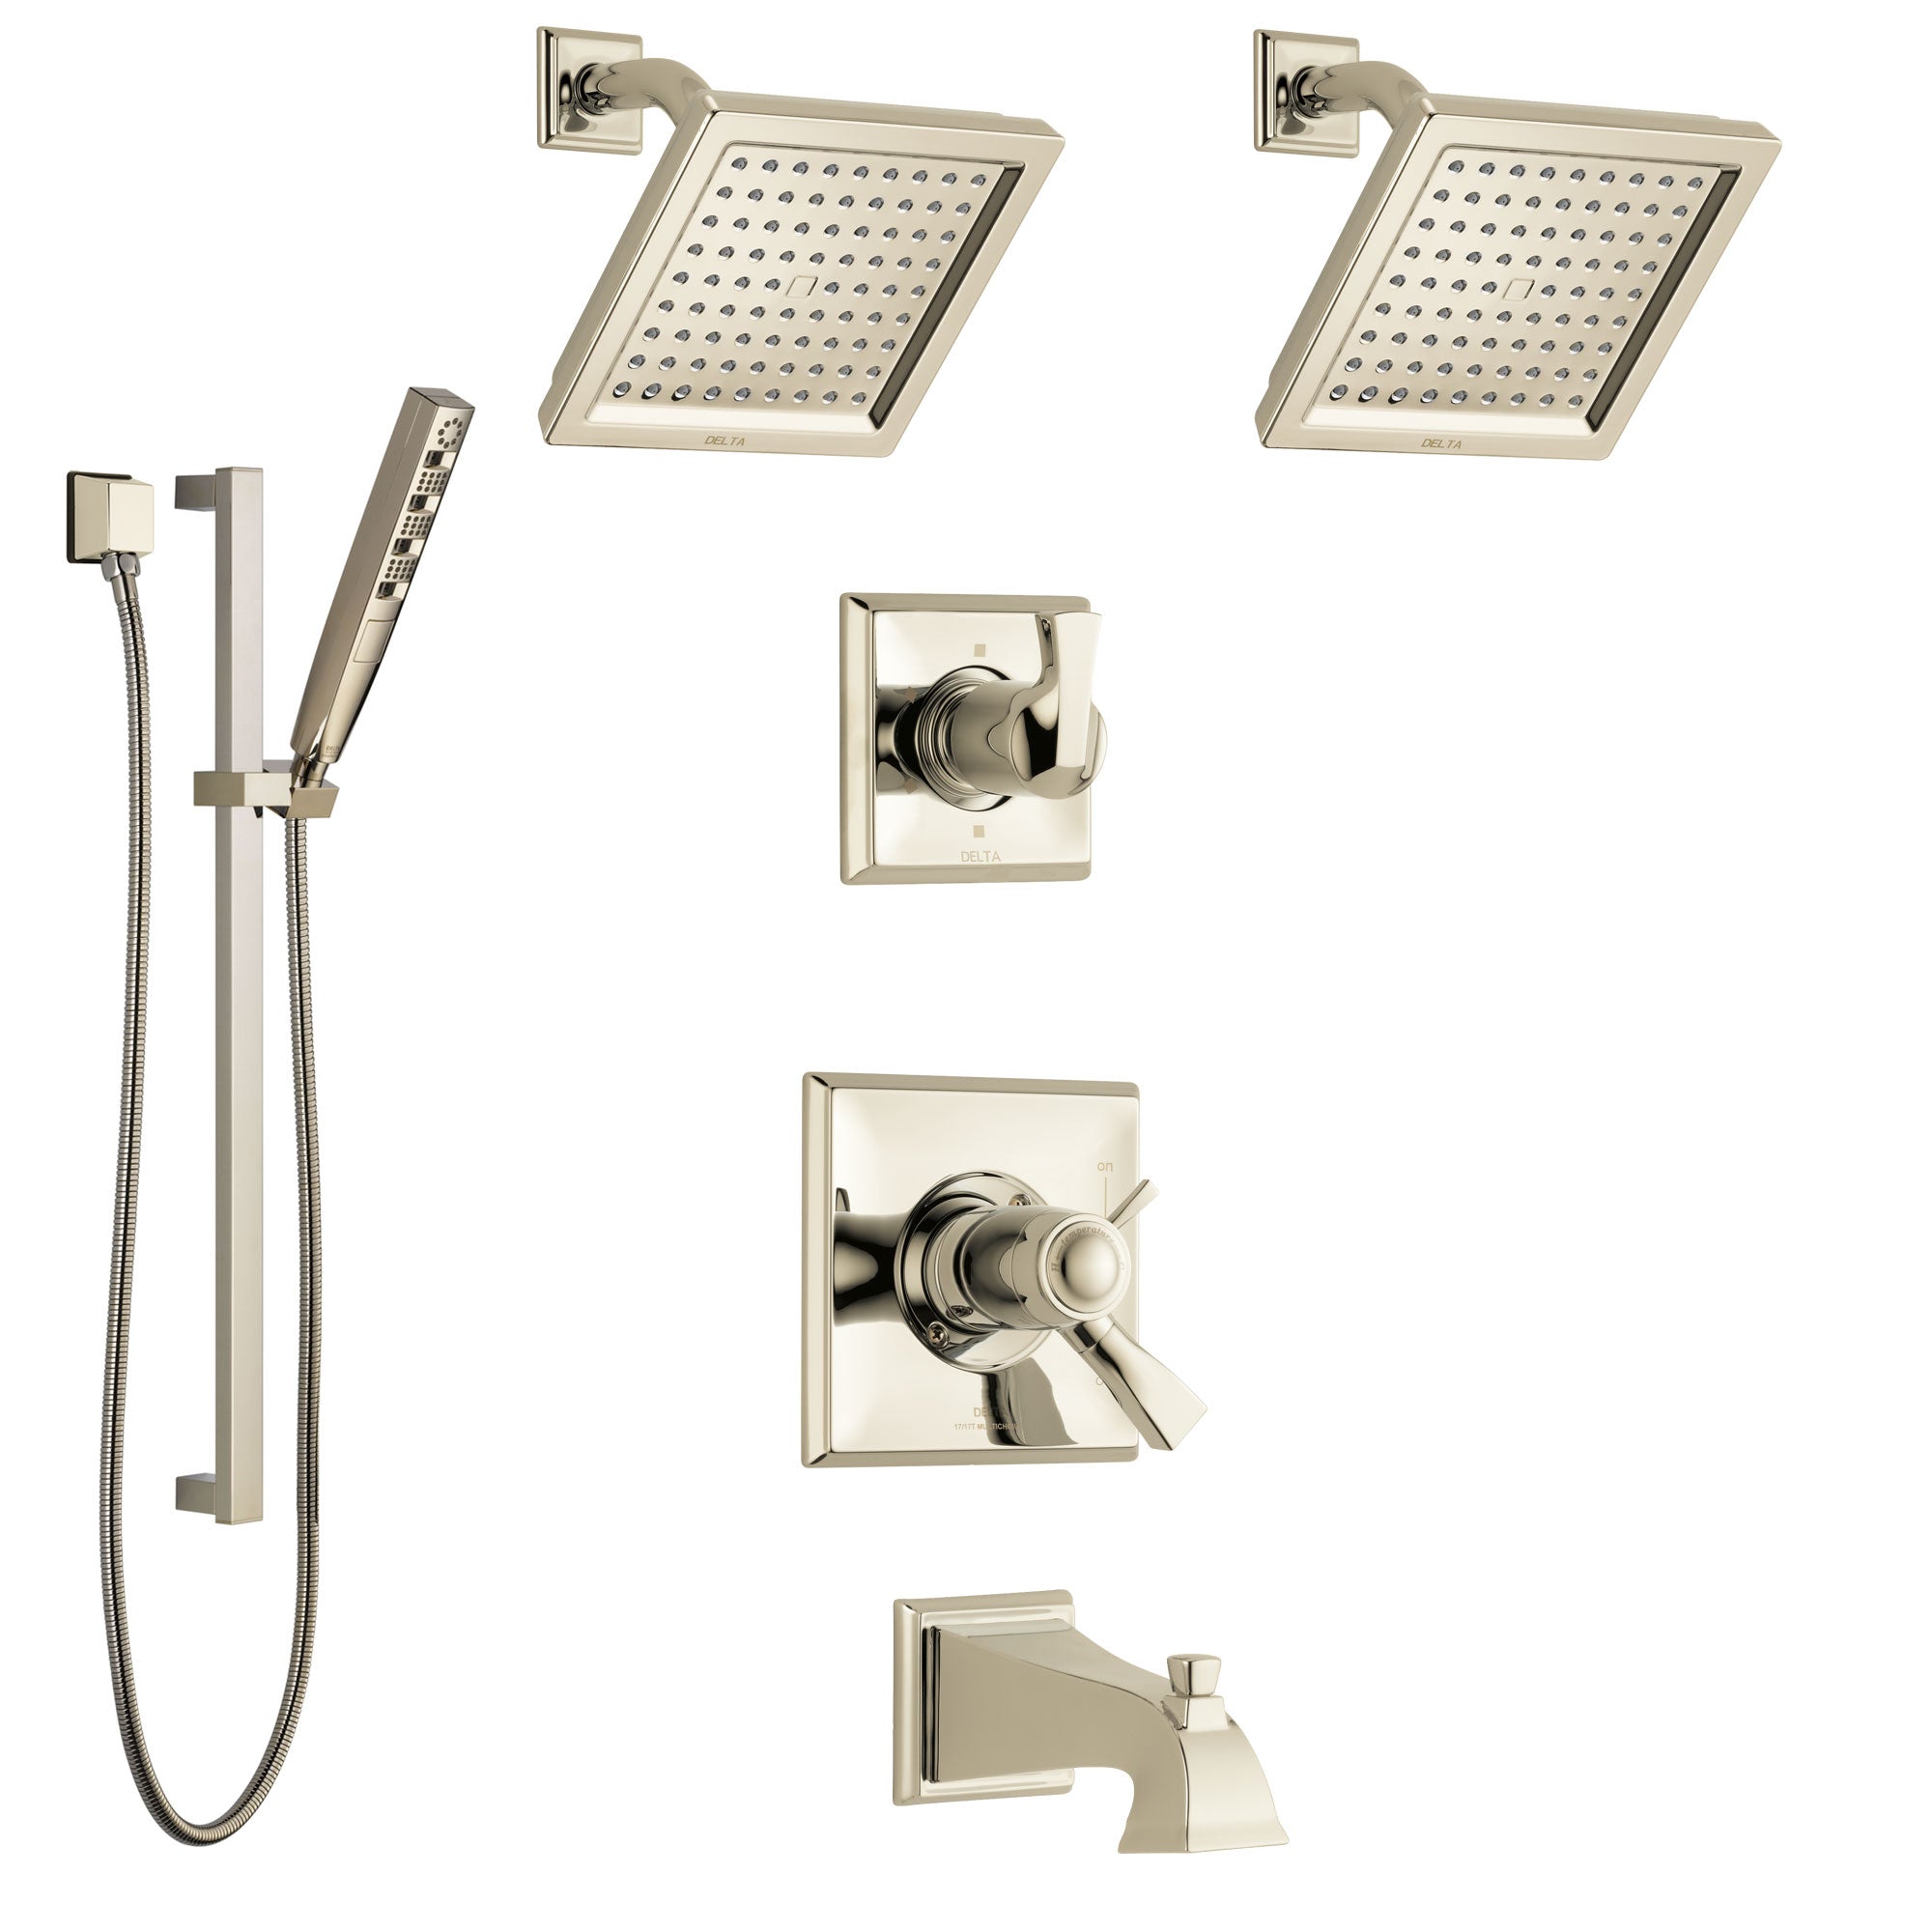 Delta Dryden Polished Nickel Tub and Shower System with Dual Thermostatic Control Handle, 6-Setting Diverter, 2 Showerheads, Hand Shower SS17T4512PN4